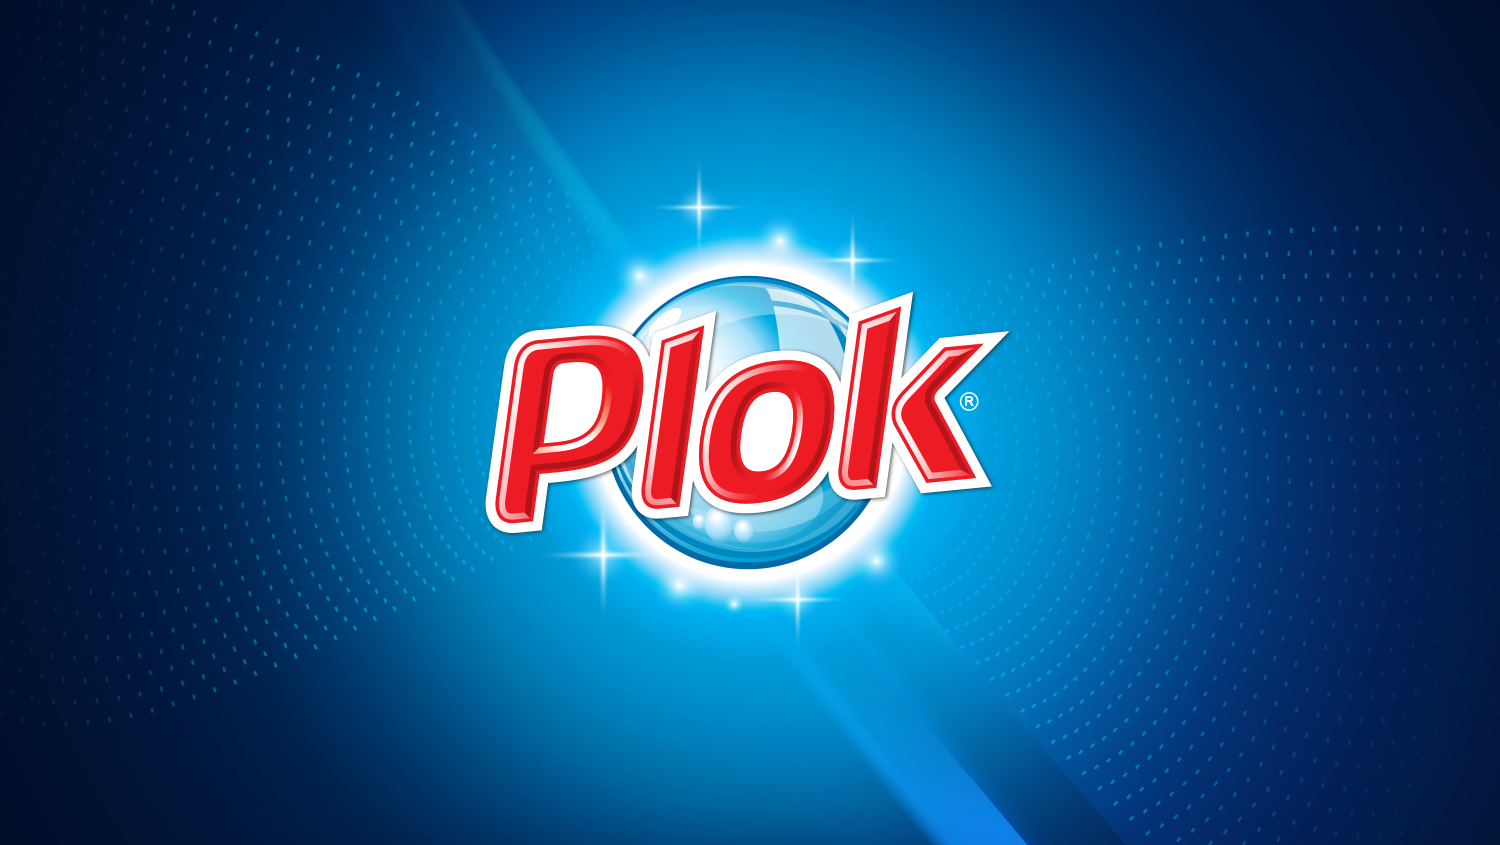 You are currently viewing Rebranding plok brand